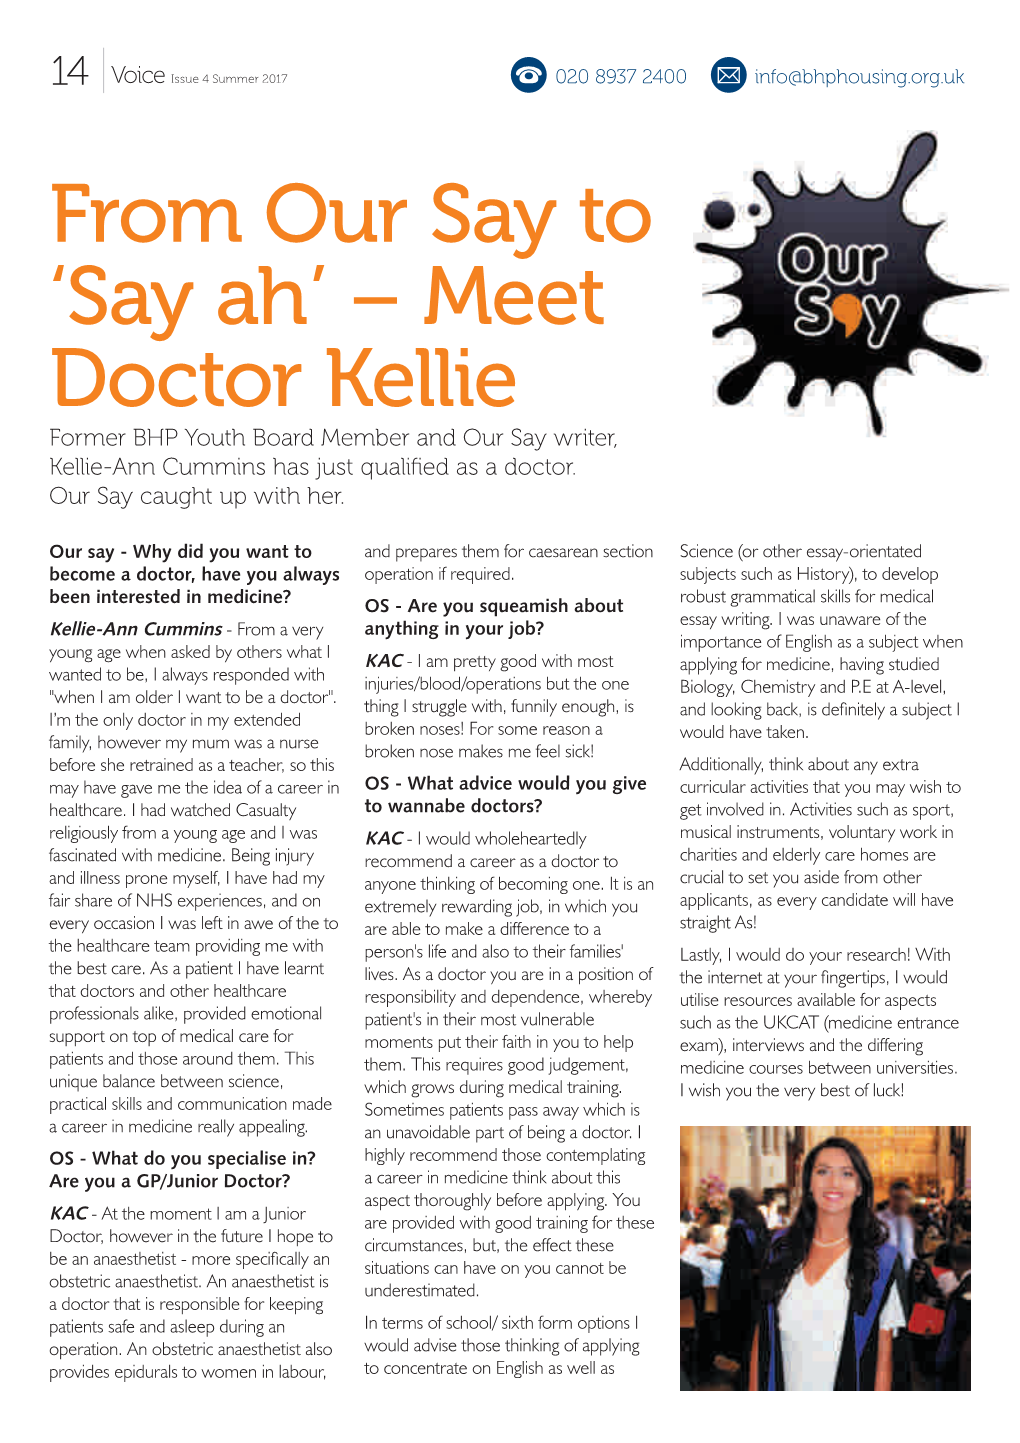 From Our Say to 'Say Ah' – Meet Doctor Kellie